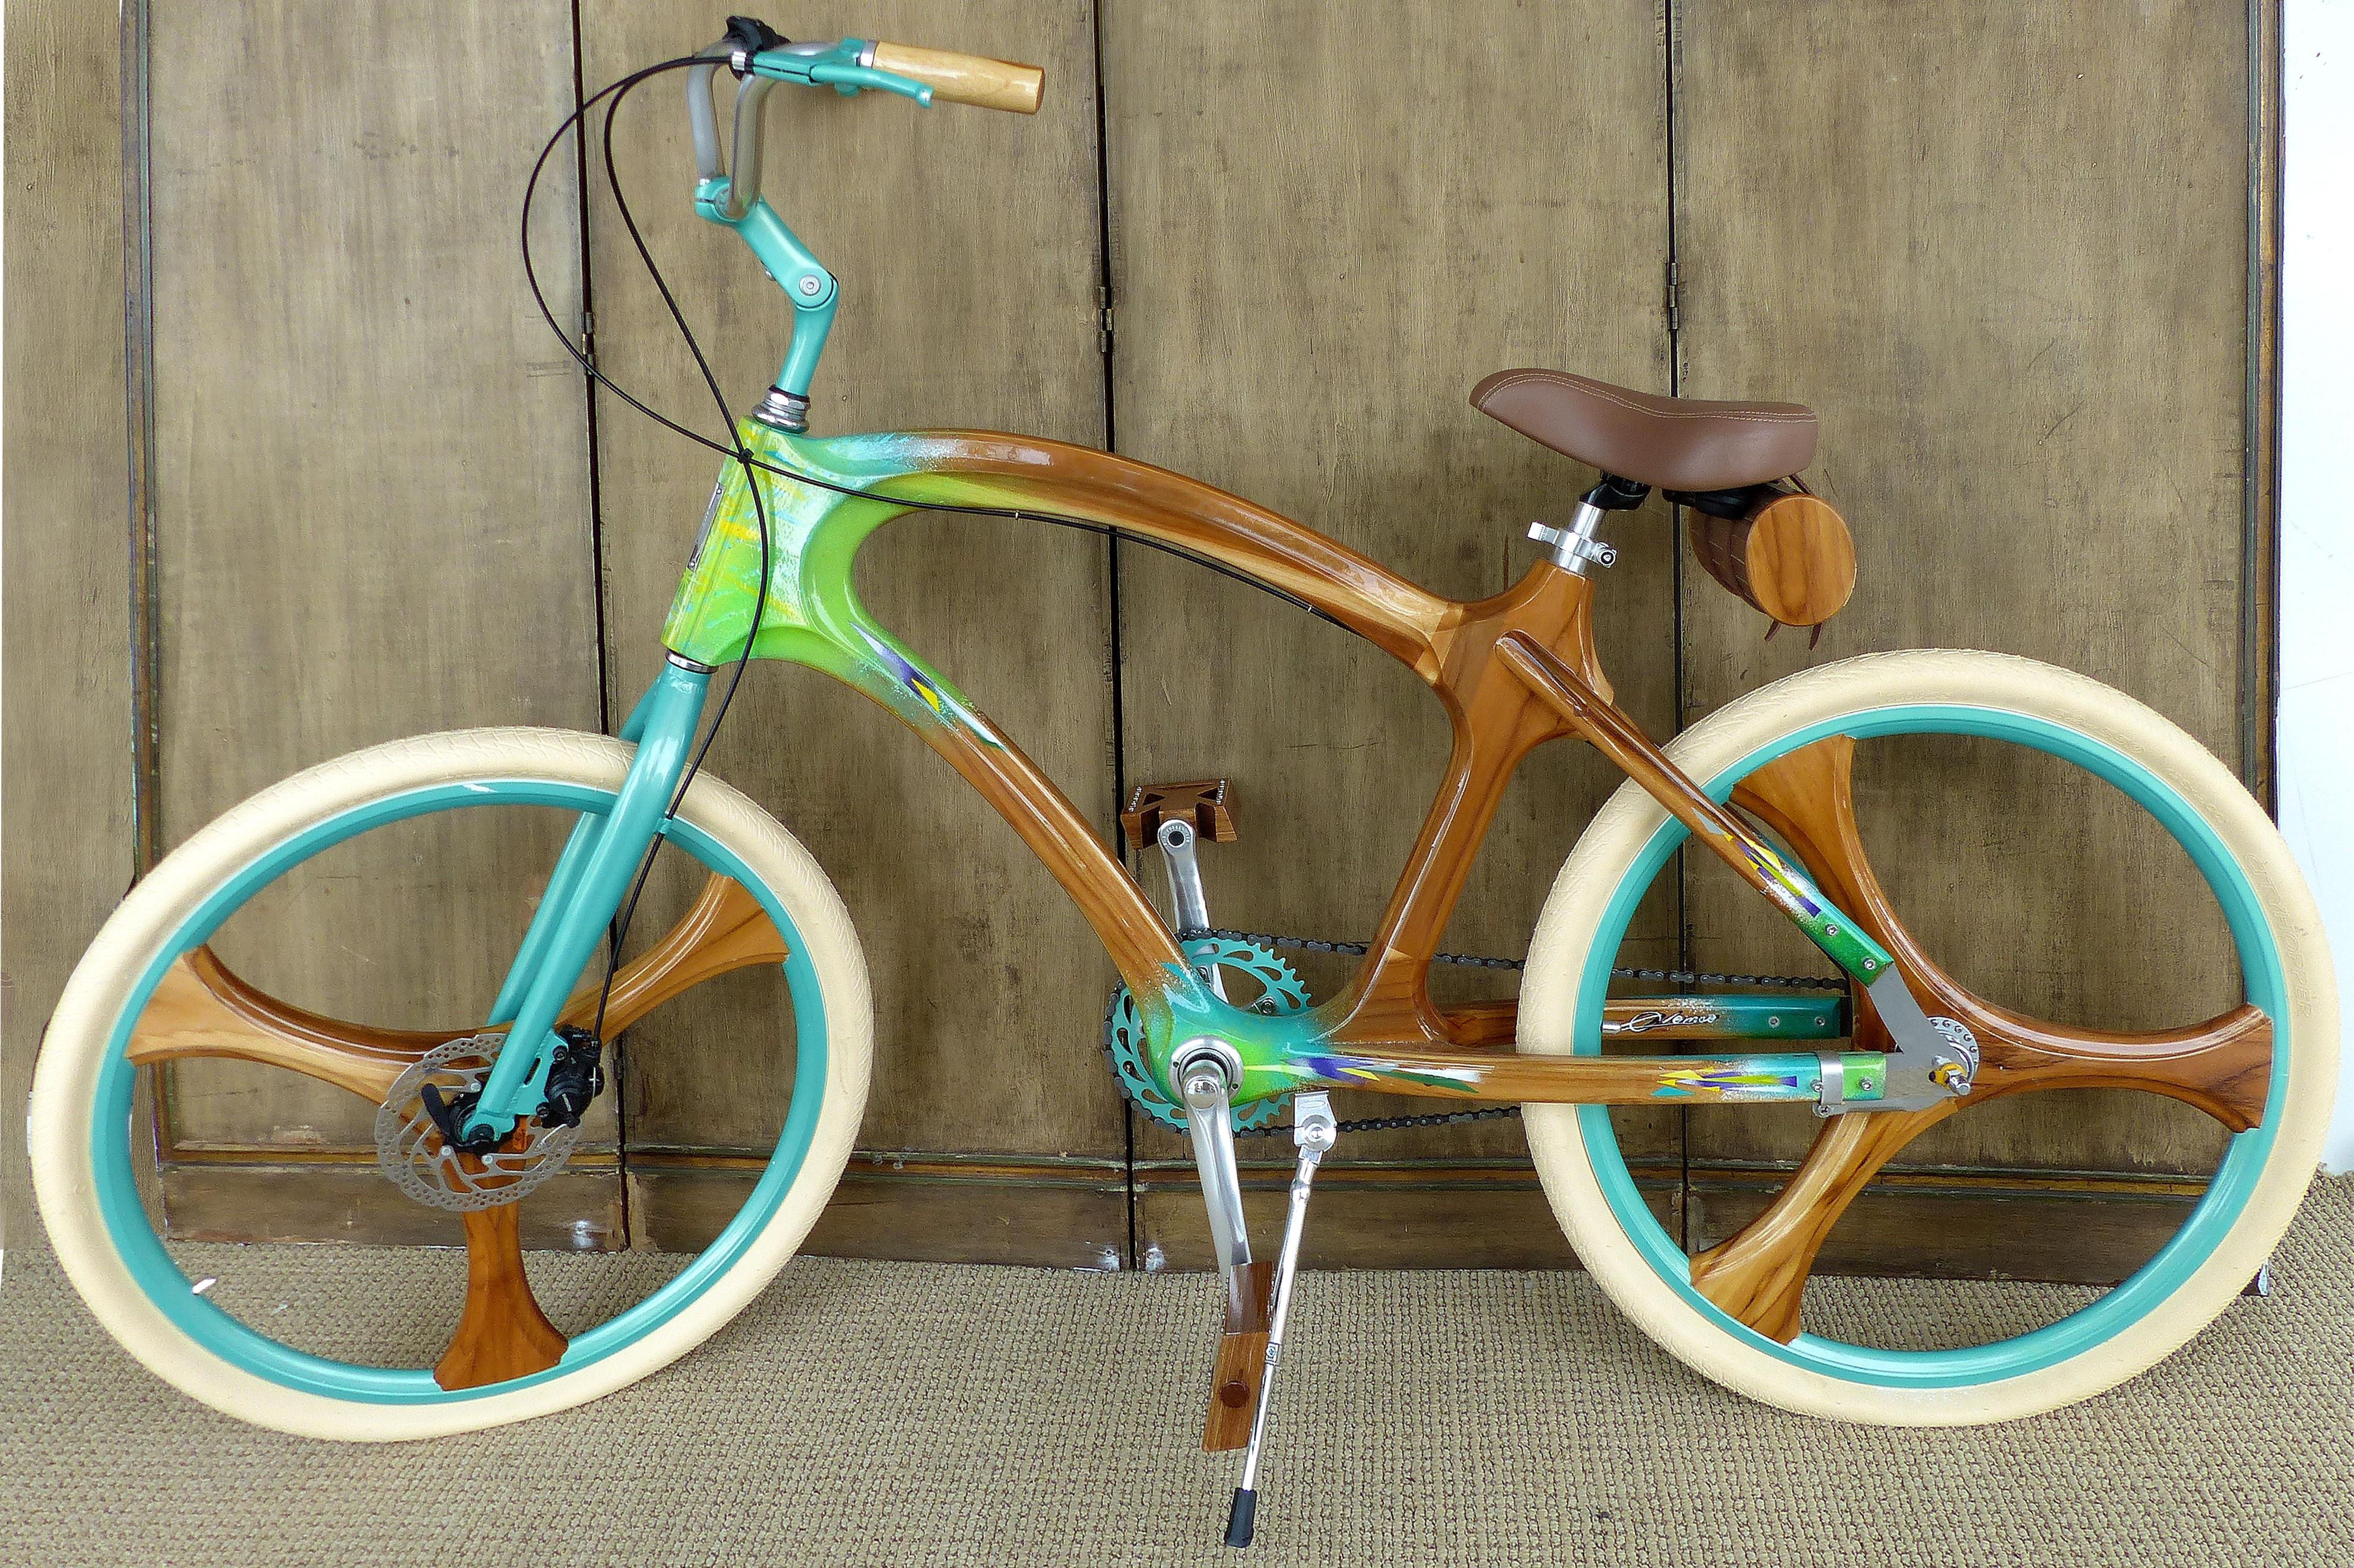 2015 Parma PWB Freedom Handmade Asian Teak Bicycle

Offered for sale is a 2015 PWB Freedom is exclusively handmade in solid Asian teak with waterproof insulation and resins. The bicycles are lovingly created and customized to allow the bike lover to